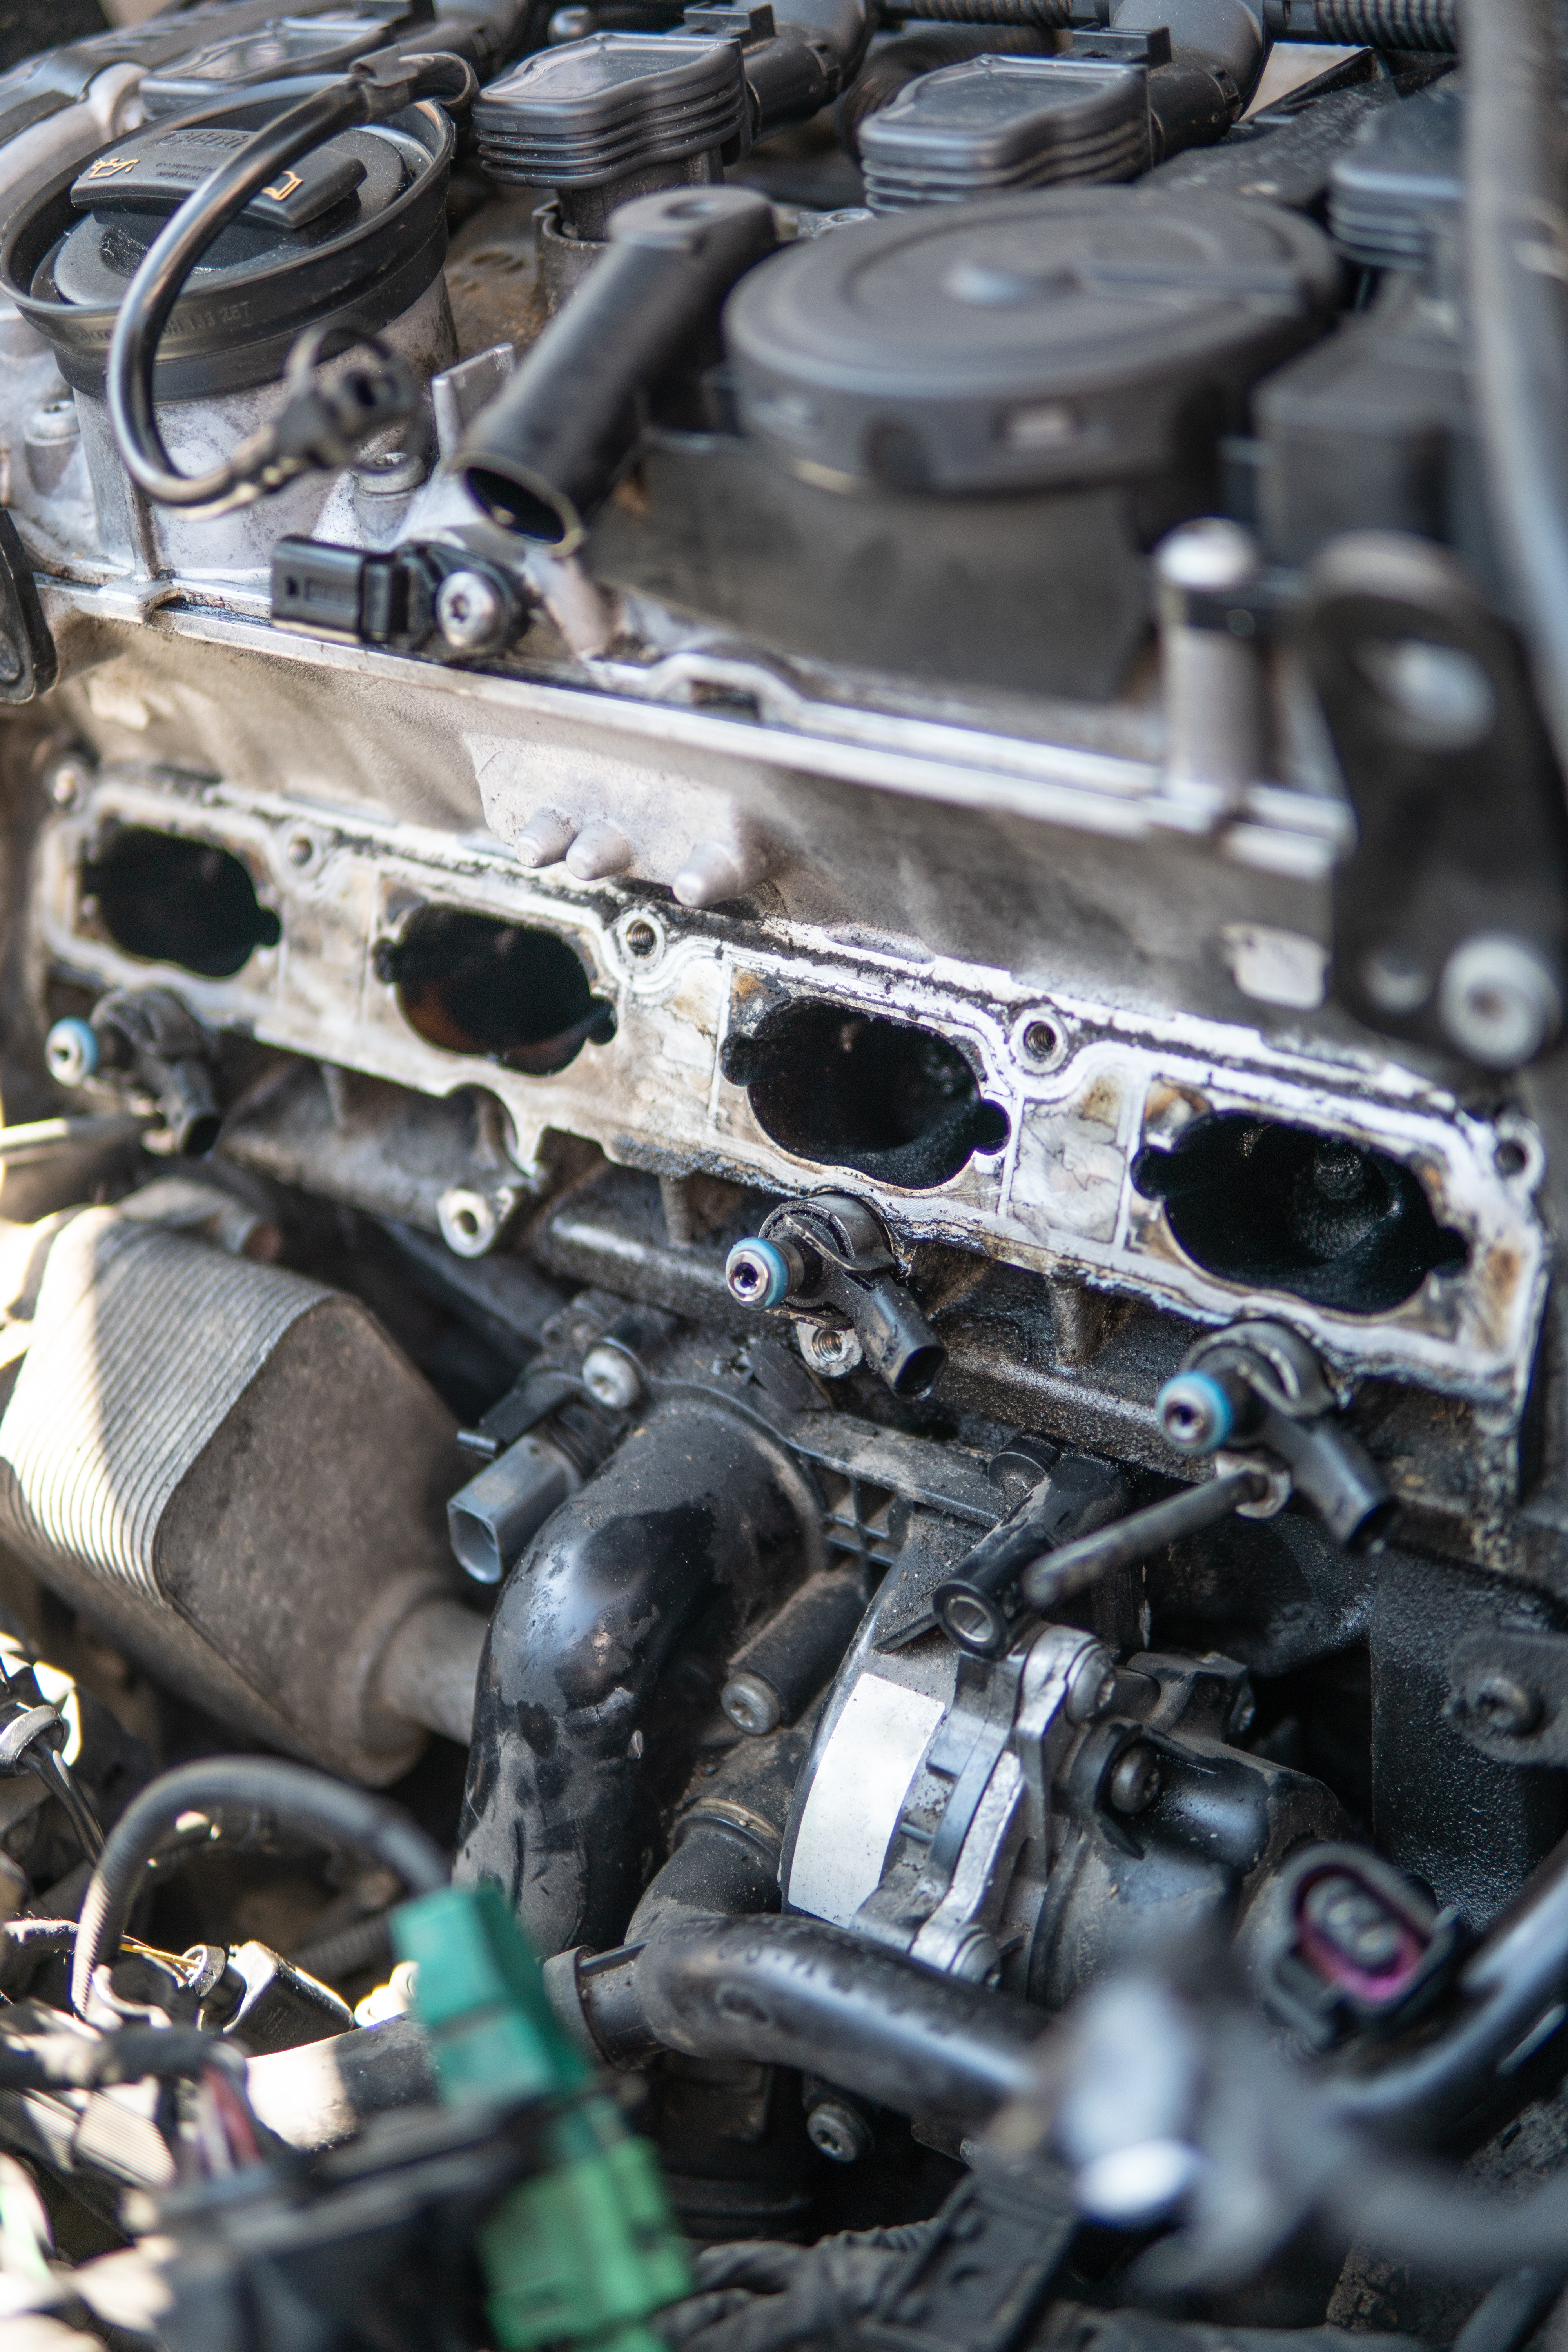 An image of a dirty intake manifold but DPF Alternatives can help with our expert intake manifold cleaning service in York, ﻿Hanover﻿ & Chambersberg, PA.